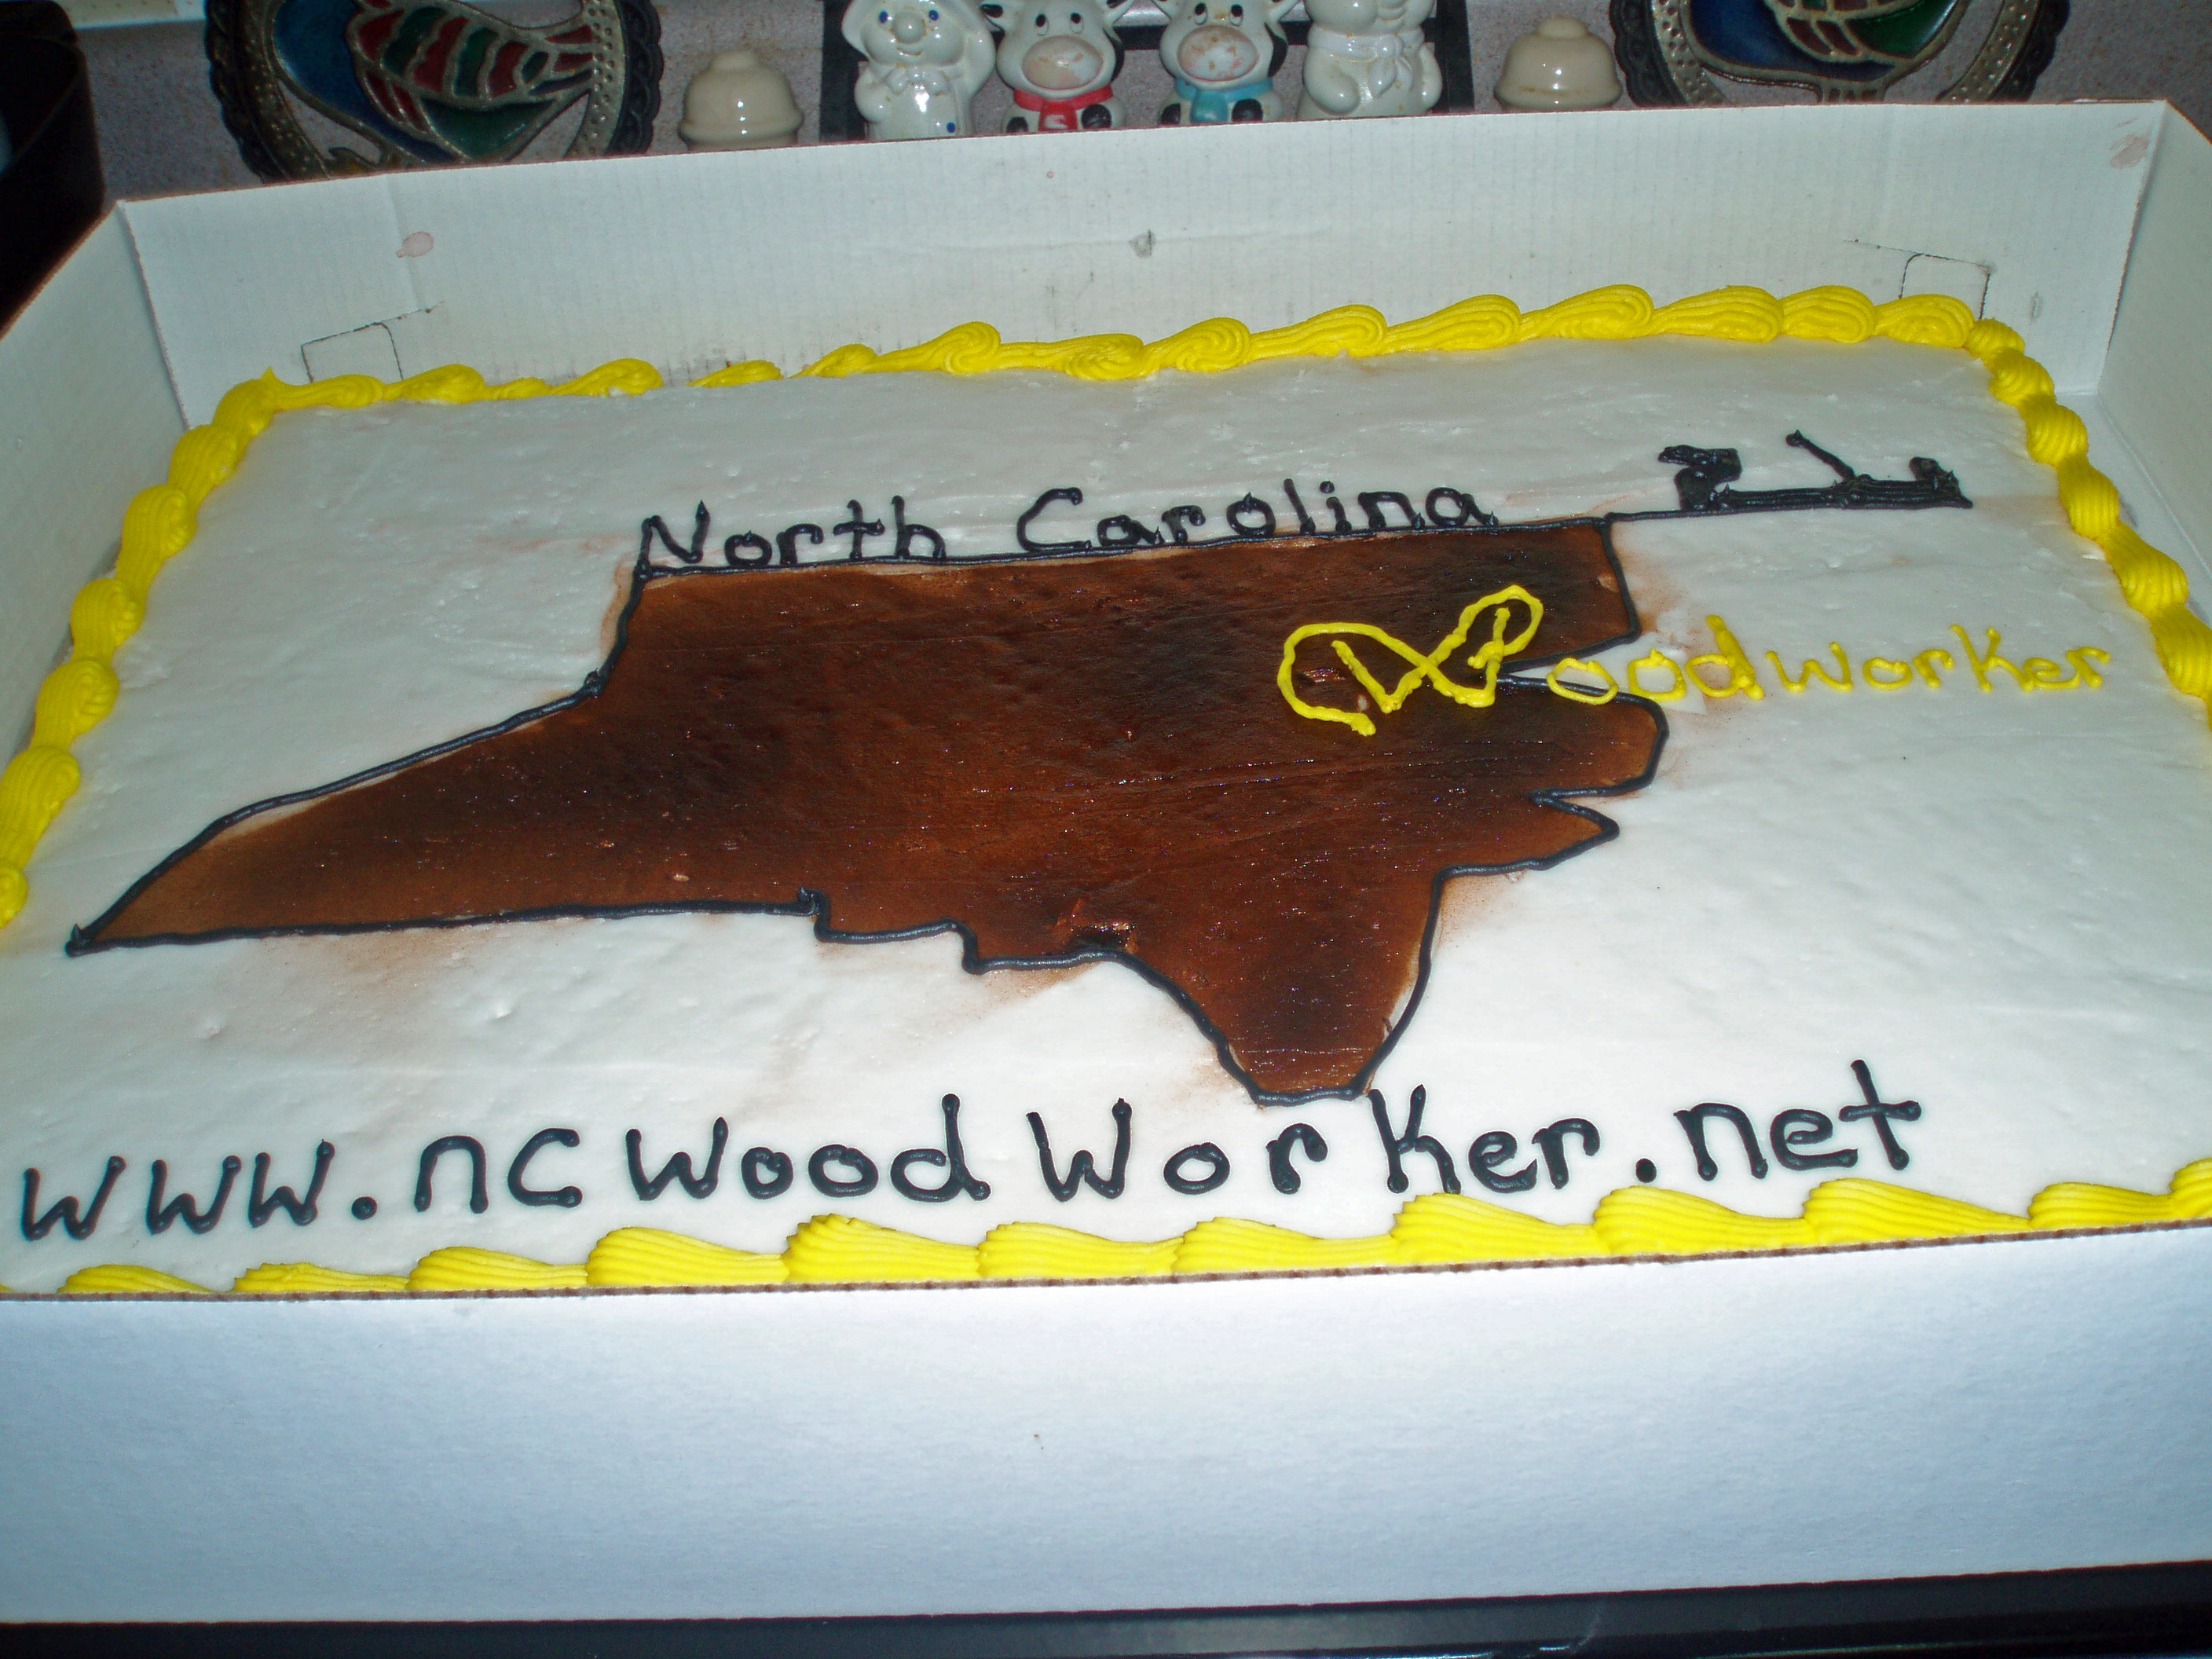 NC Woodworker Cake